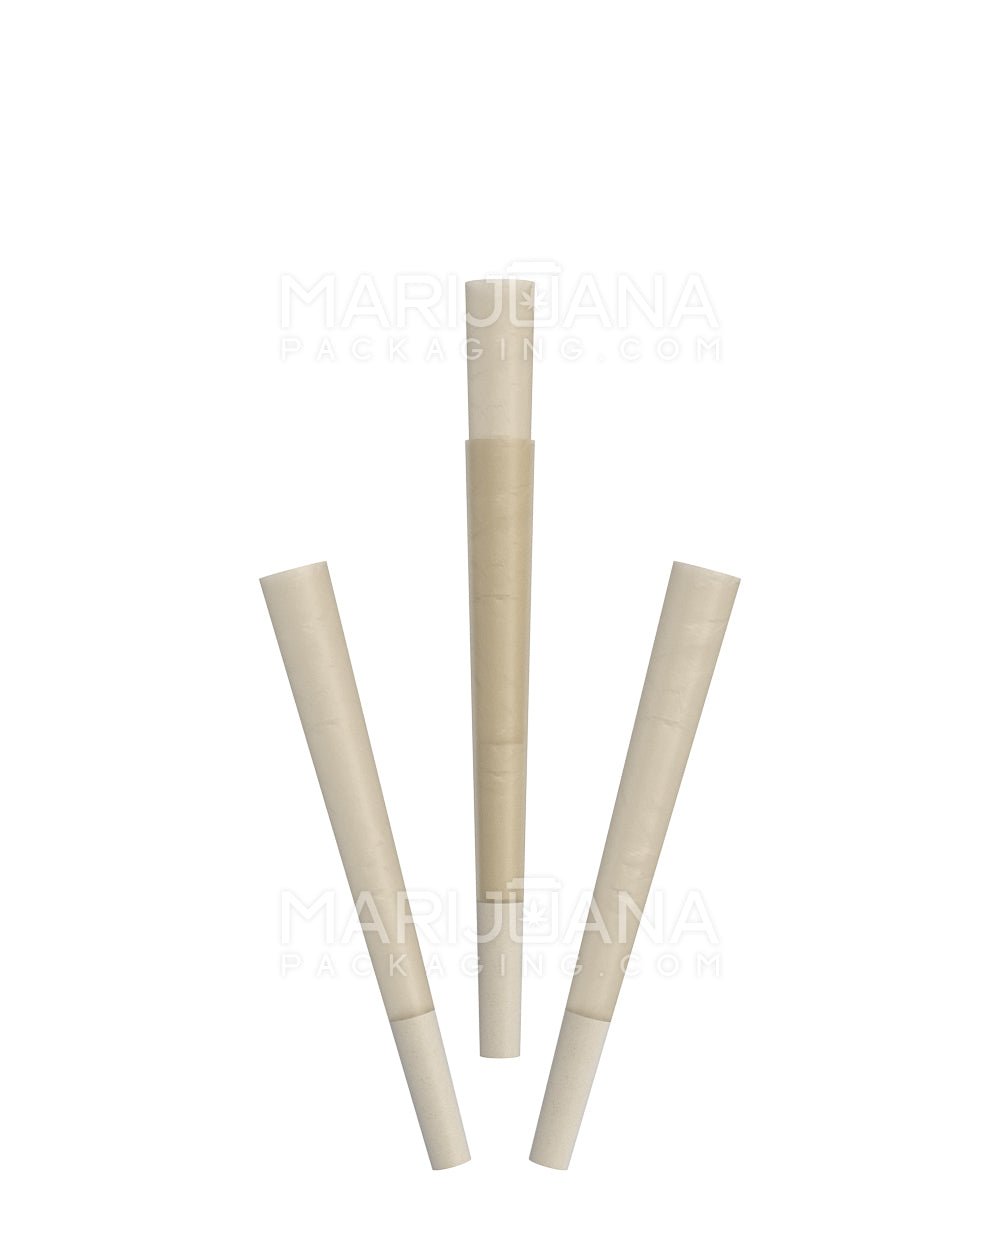 ROL | 1 1/4th Size Pre-Rolled Cones | 84mm - Khaki Brown Paper - 900 Count - 6